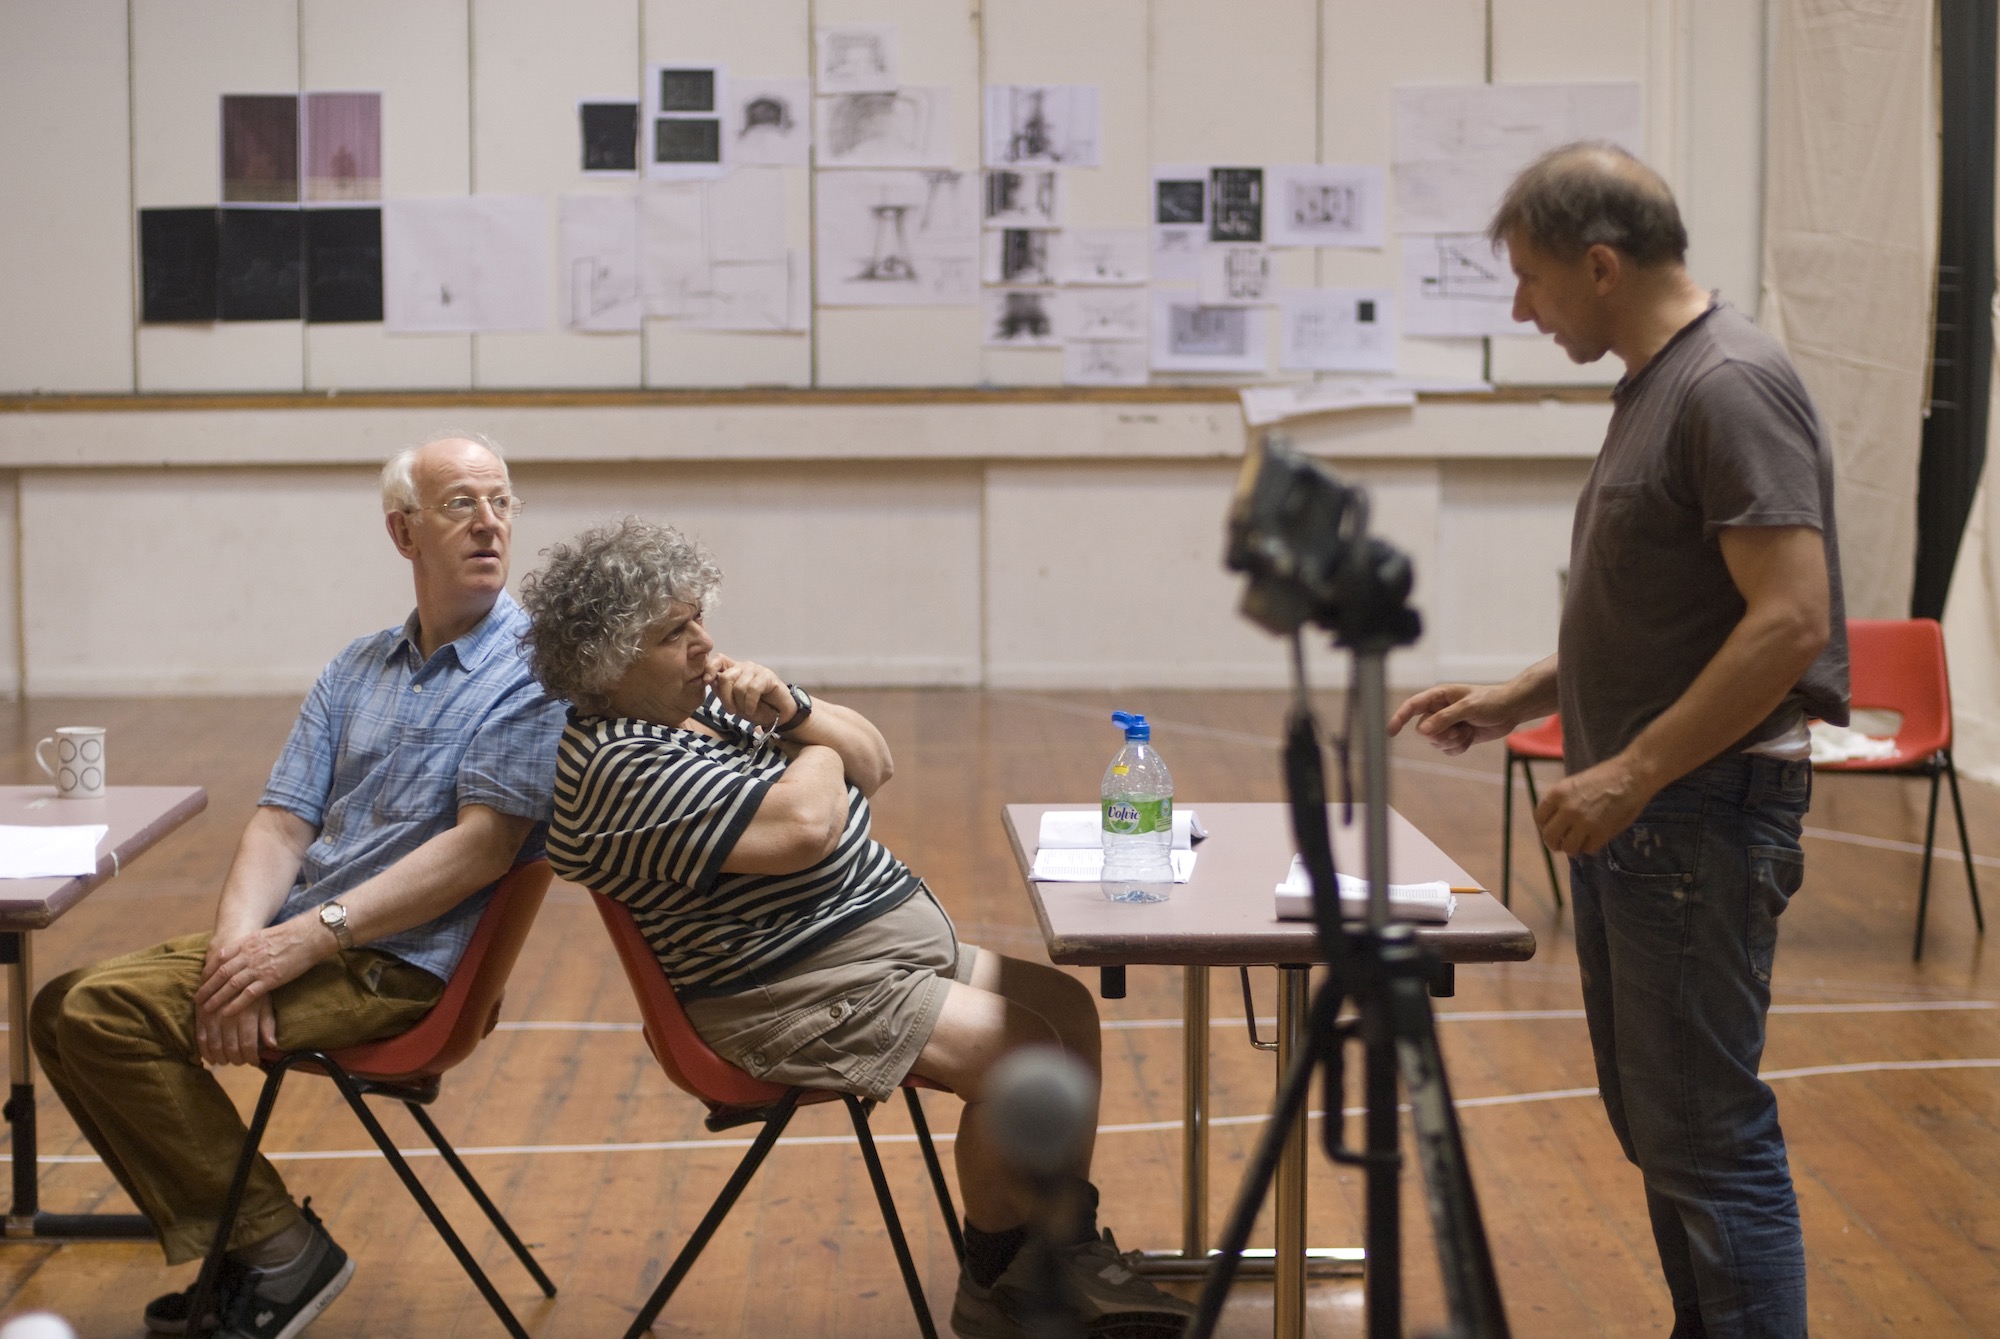 In rehearsals, two sitting actors talk to a standing director, all looking thoughtful